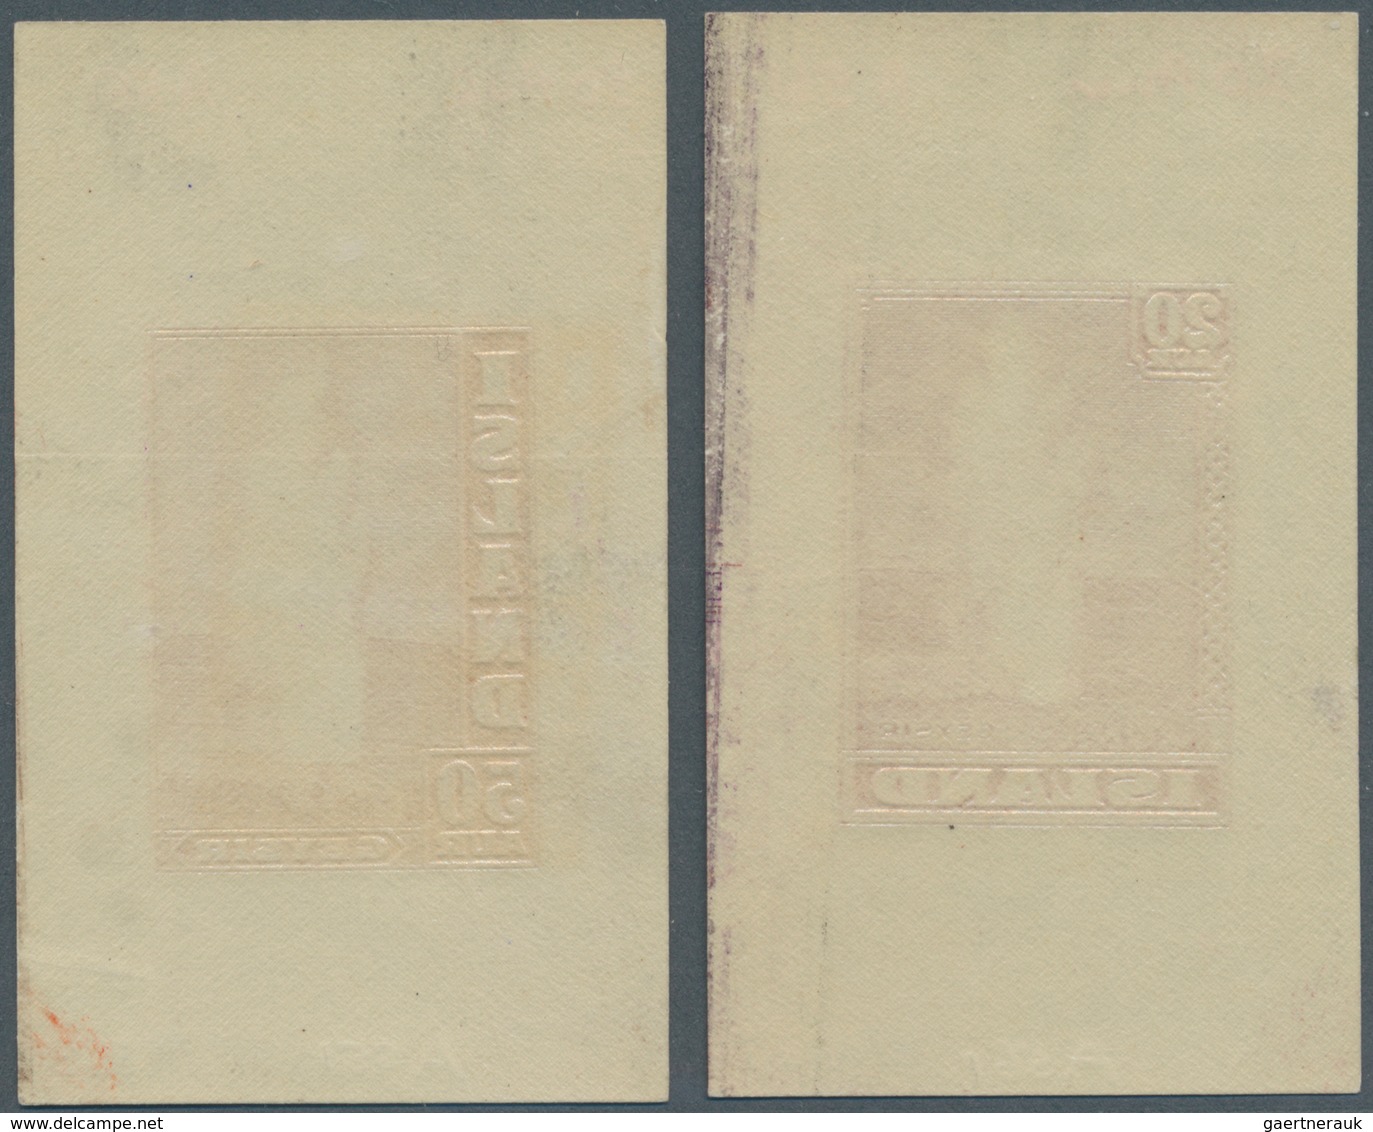 Island: 1938, Great Geyser 20aur. And 50aur. In IMPERFORATE DIE PROOFS In Different Shades Of Red On - Autres & Non Classés